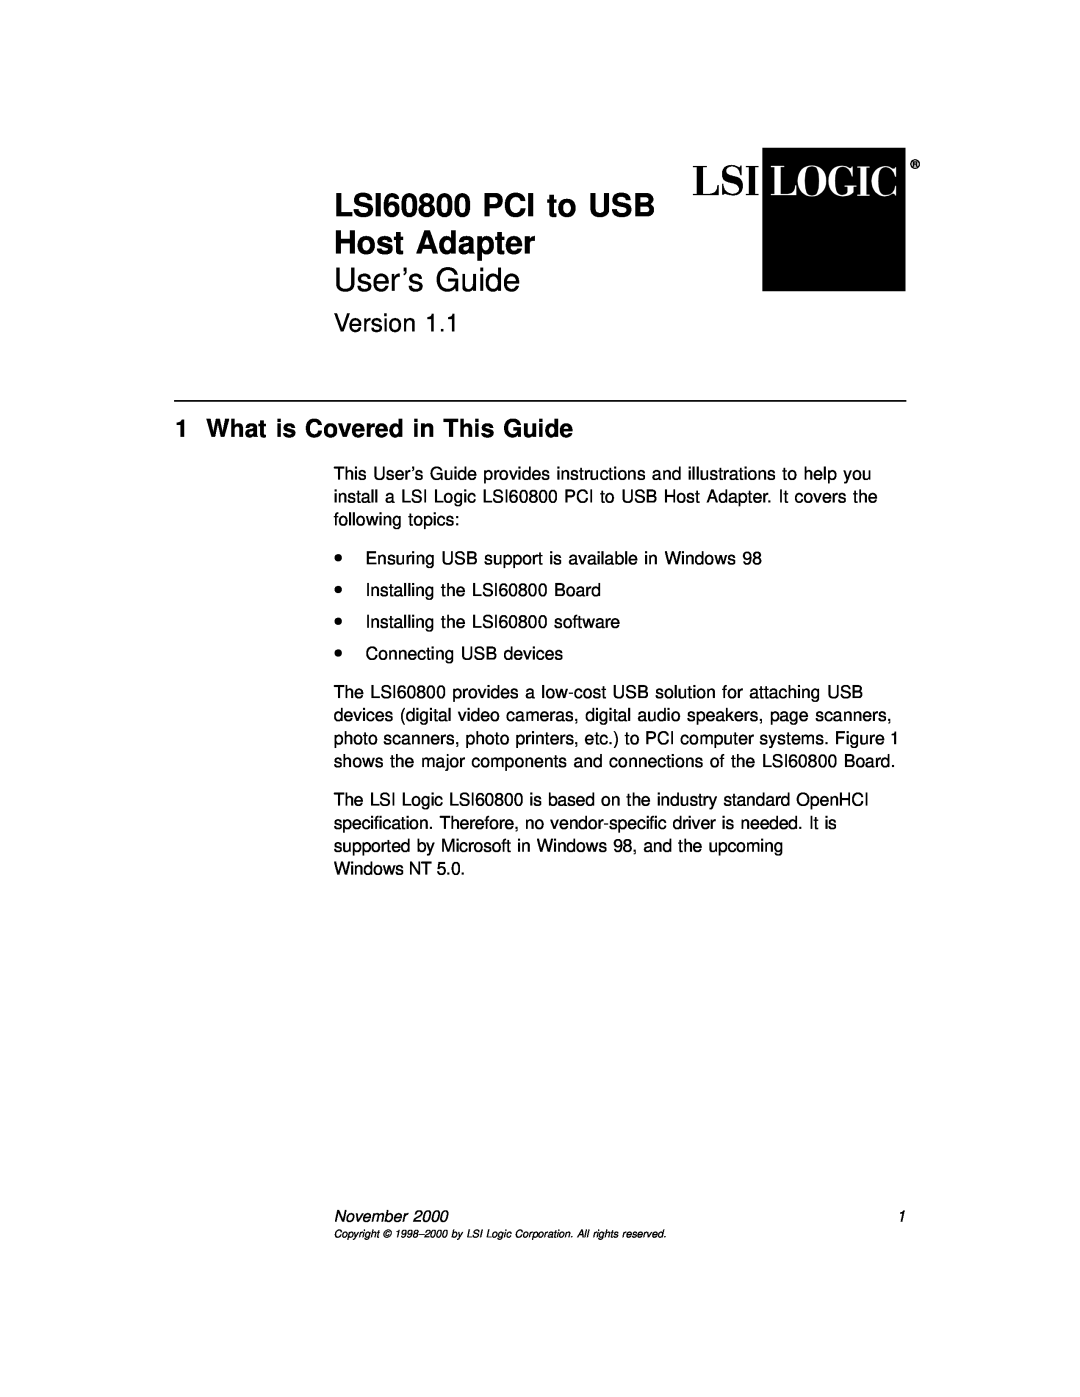 LSI manual What is Covered in This Guide, LSI60800 PCI to USB Host Adapter, User’s Guide, Version 